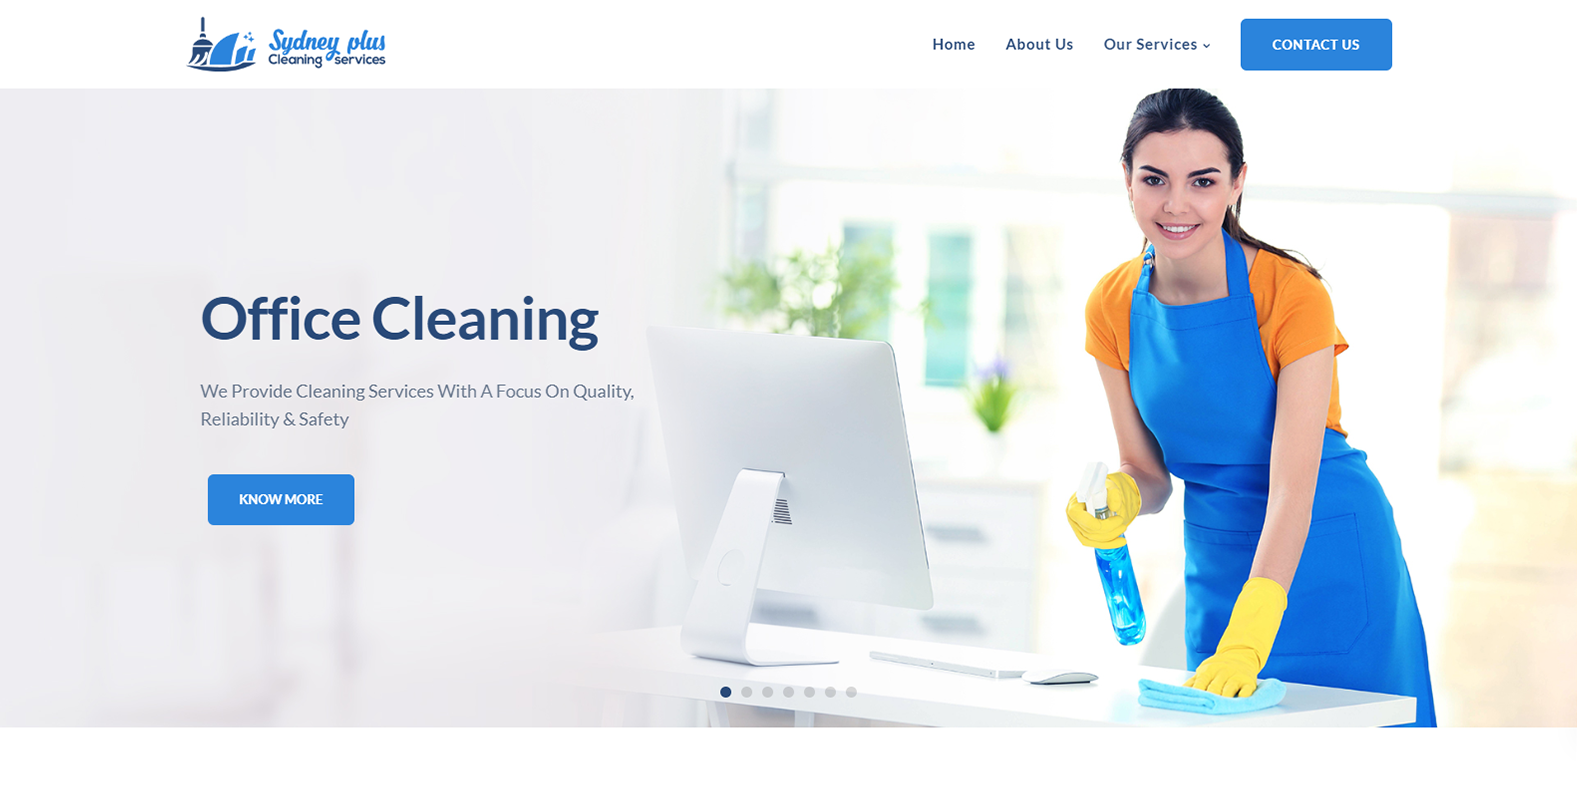 Sydney Plus Cleaning Services